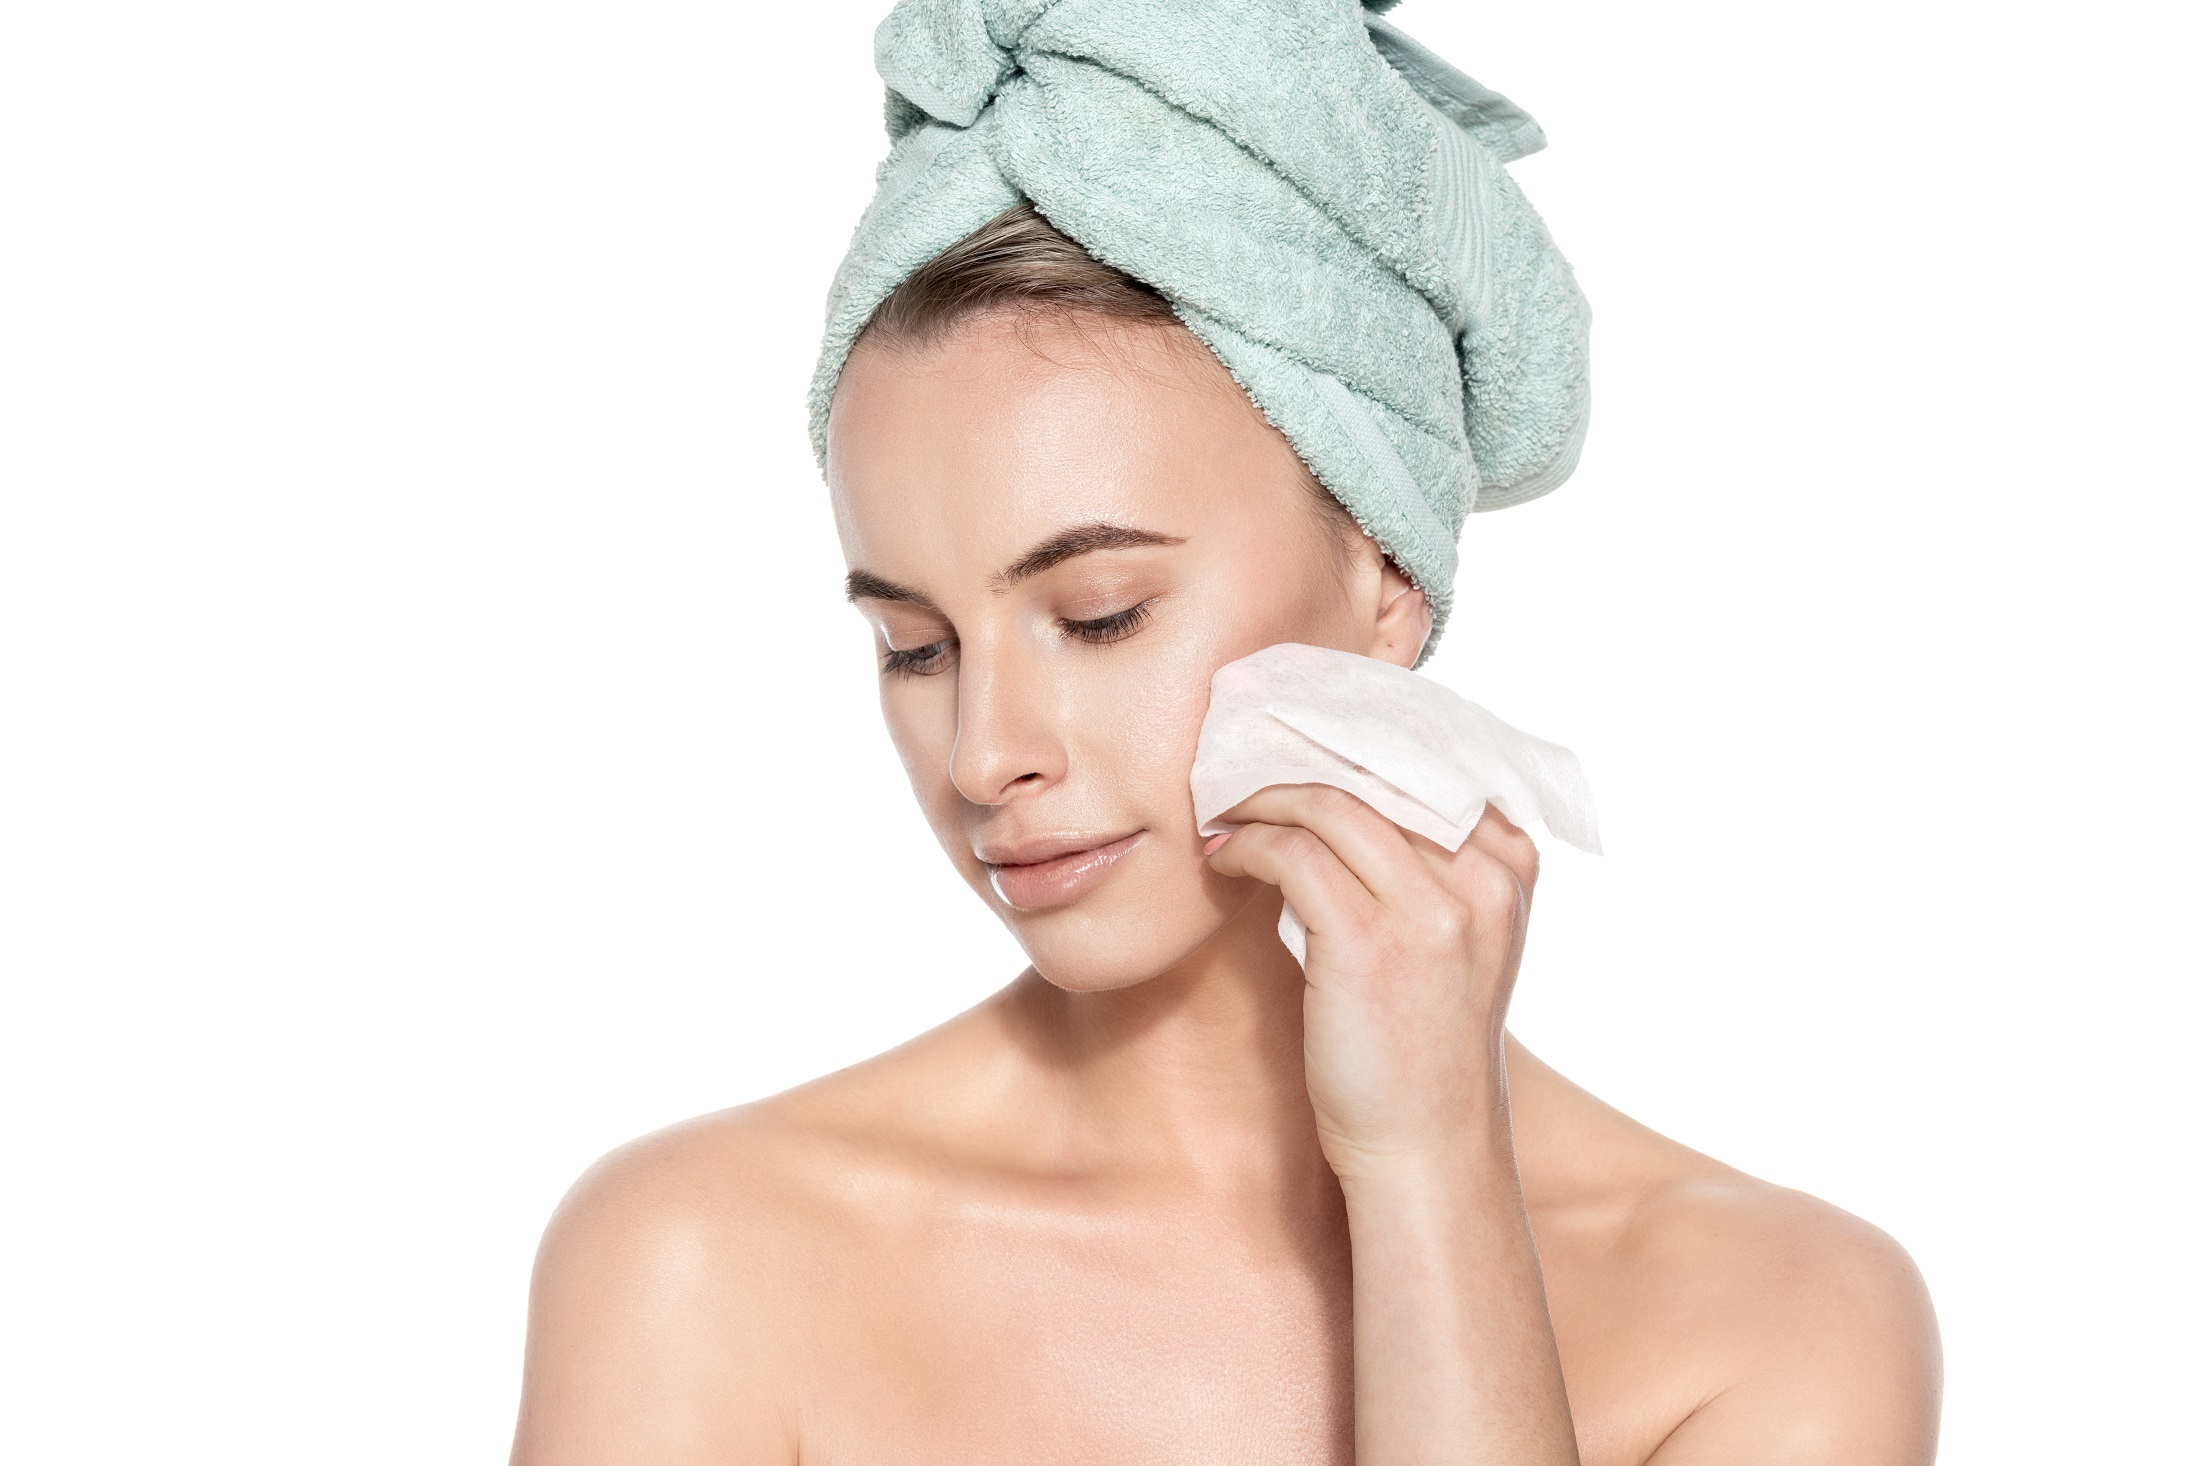 These 4 beauty products are not good for your skin. Check if you are using them